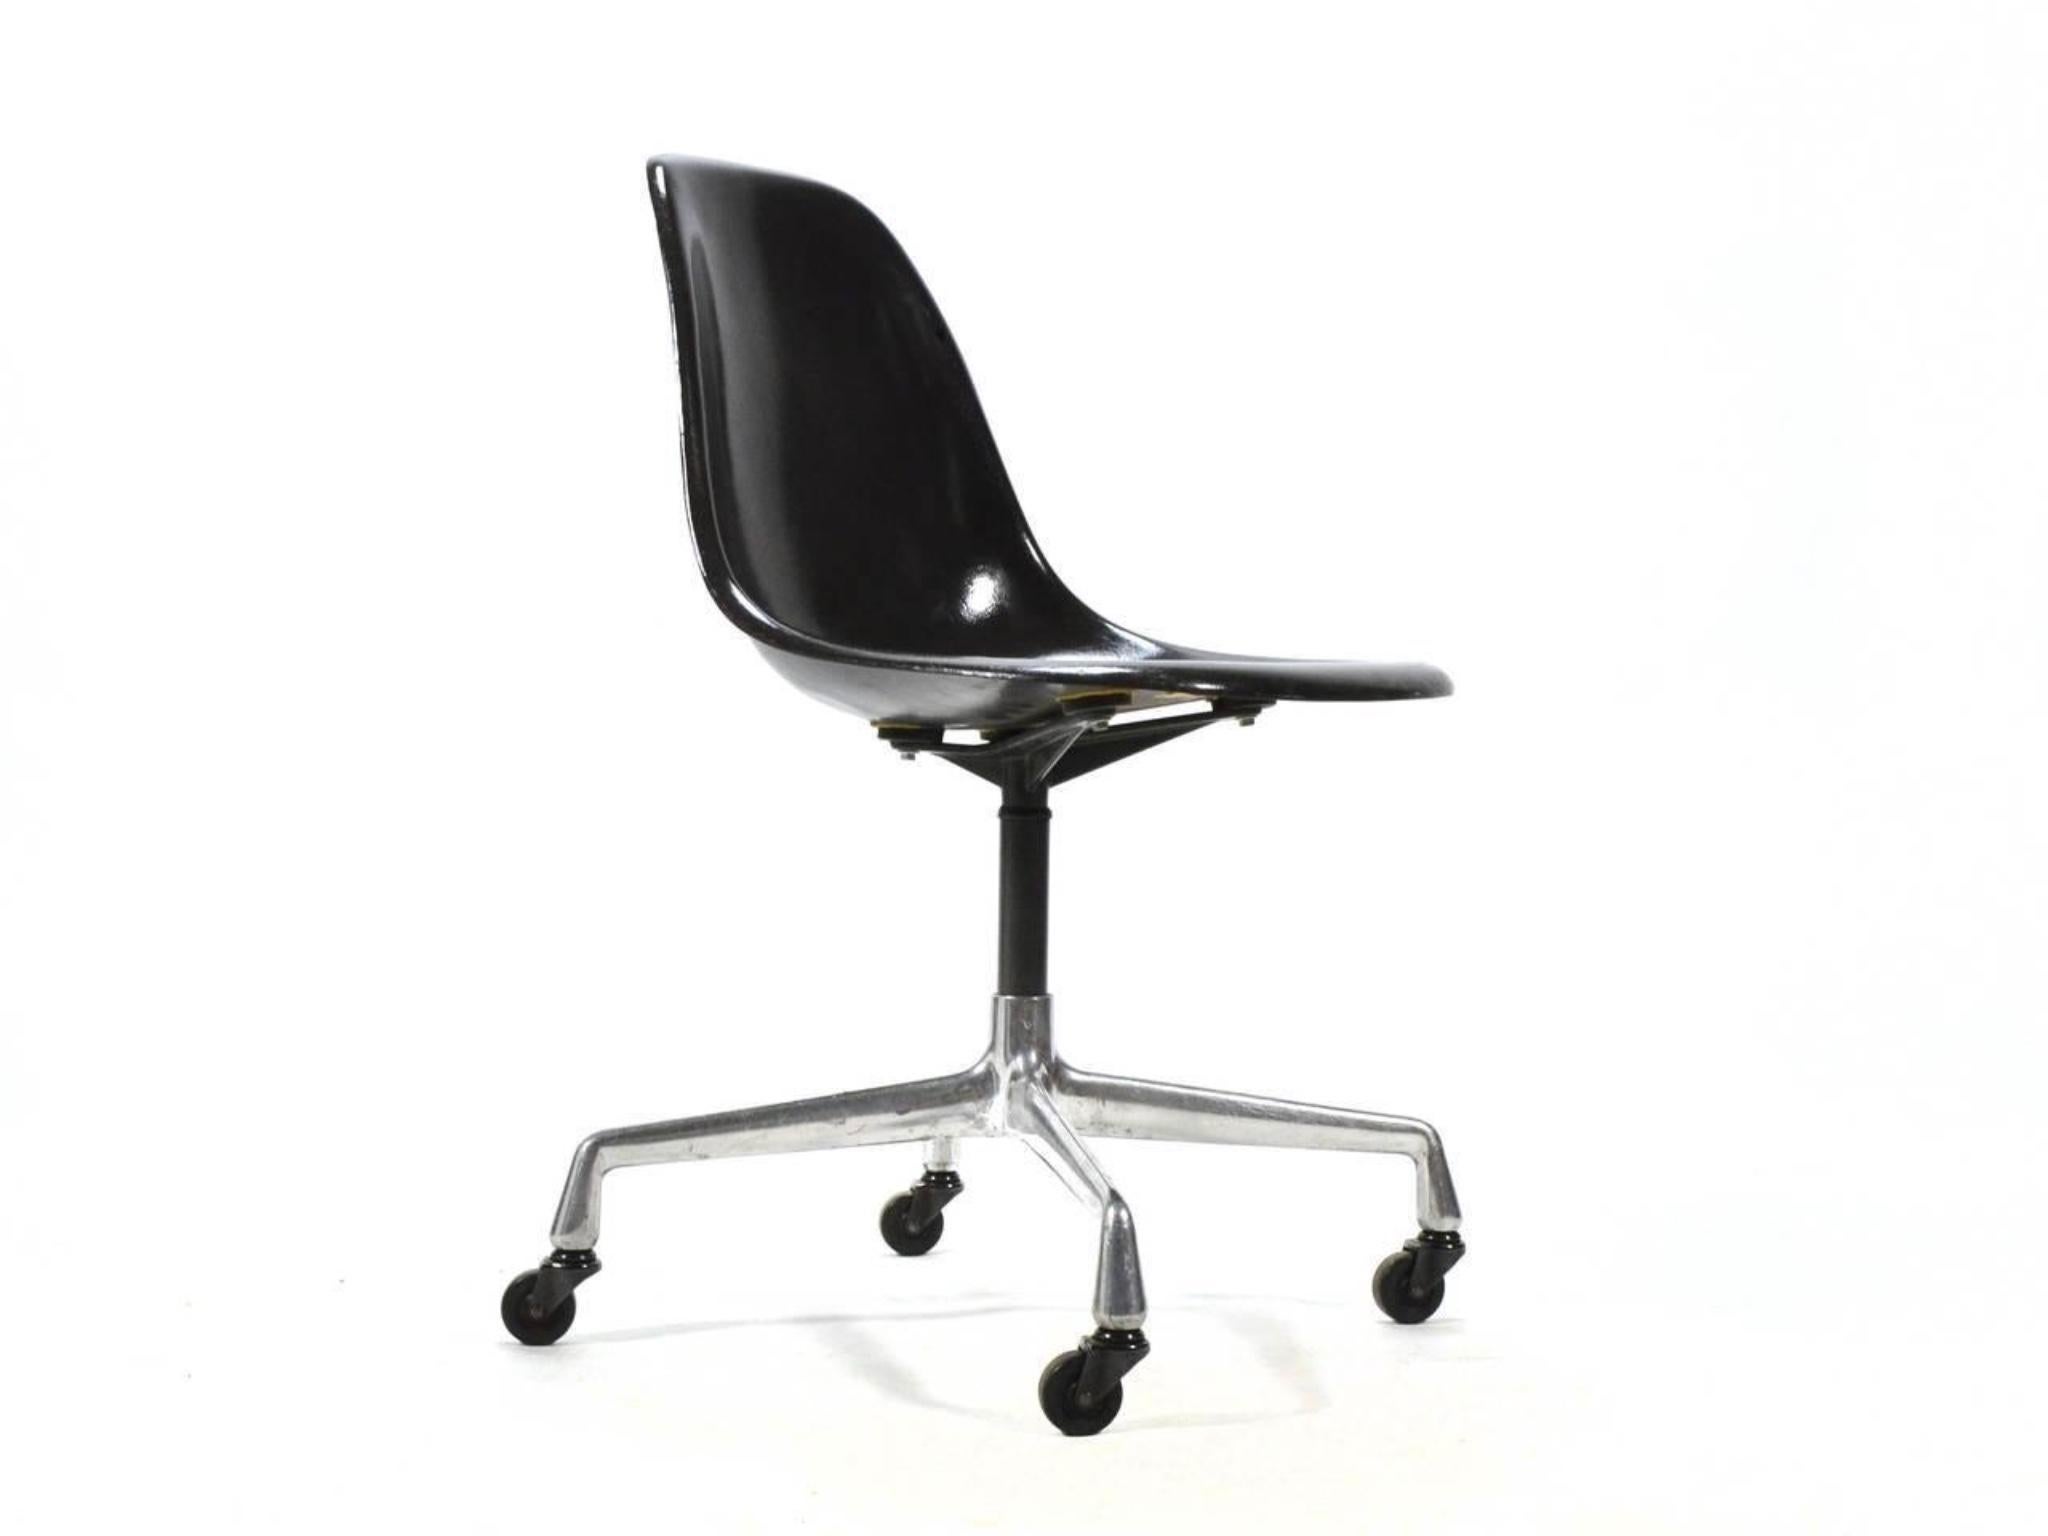 Six classic and pristine fiberglass, armless Eames shell chairs, also referred to as the PSCC, designed for Herman Miller, circa 1950s. The chair is supported on a metal column and cross legs on casters. Measures: 18